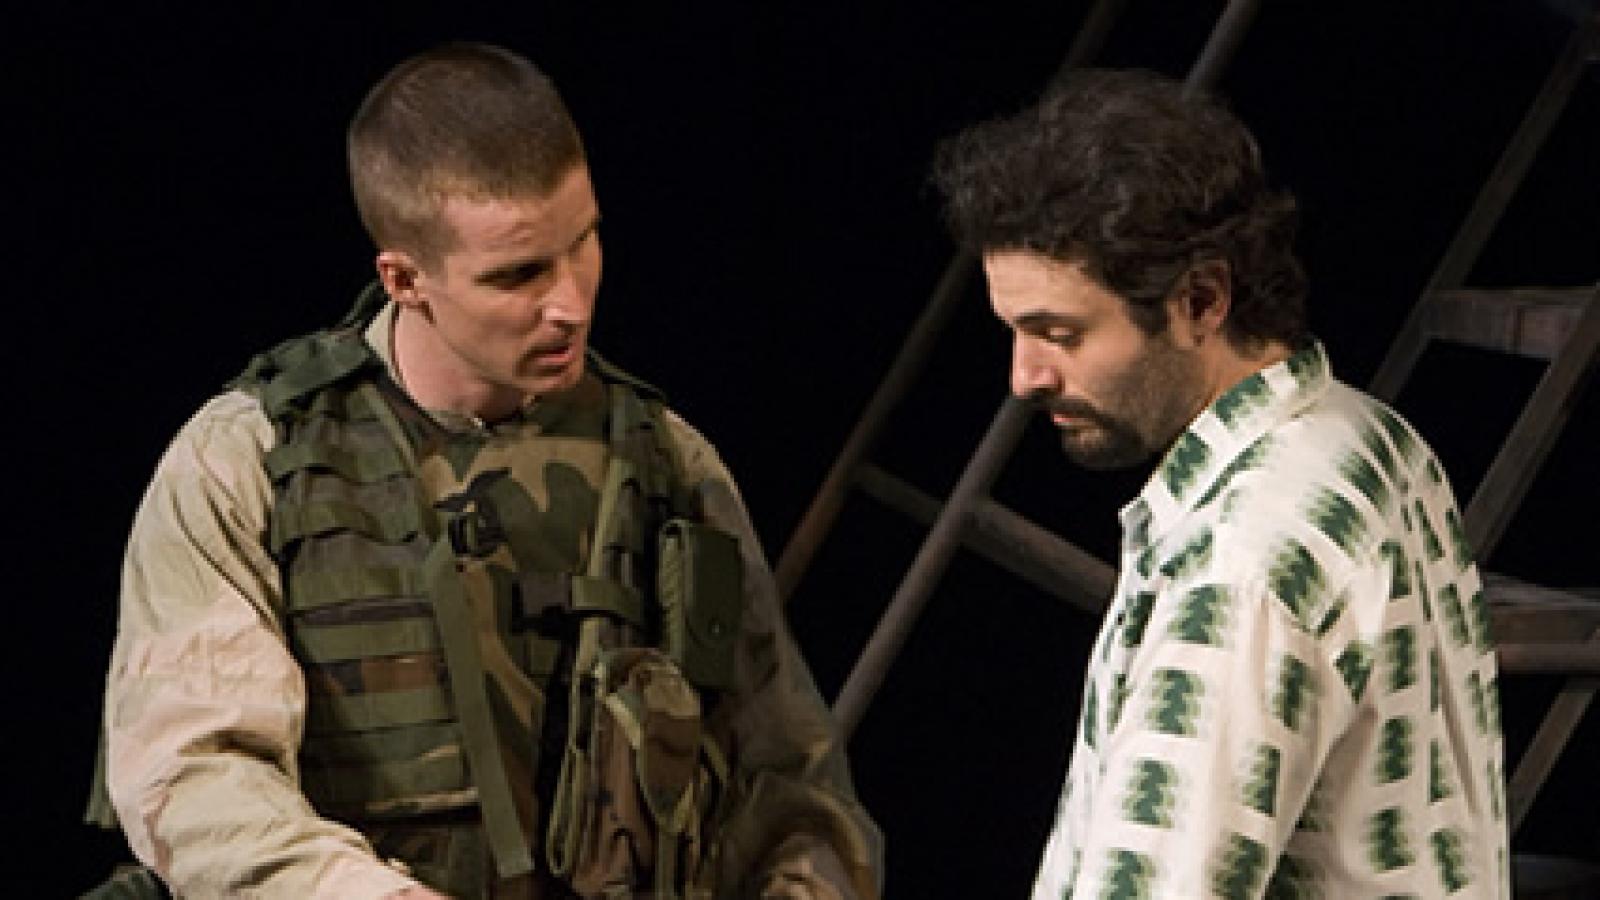 L to R: Brad Fleischer and Arian Moayed in the world premiere production of "Bengal Tiger at the Baghdad Zoo" by Rajiv Joseph, directed by Moisés Kaufman, at the Center Theatre Group/Kirk Douglas Theatre. Photo by Craig Schwartz